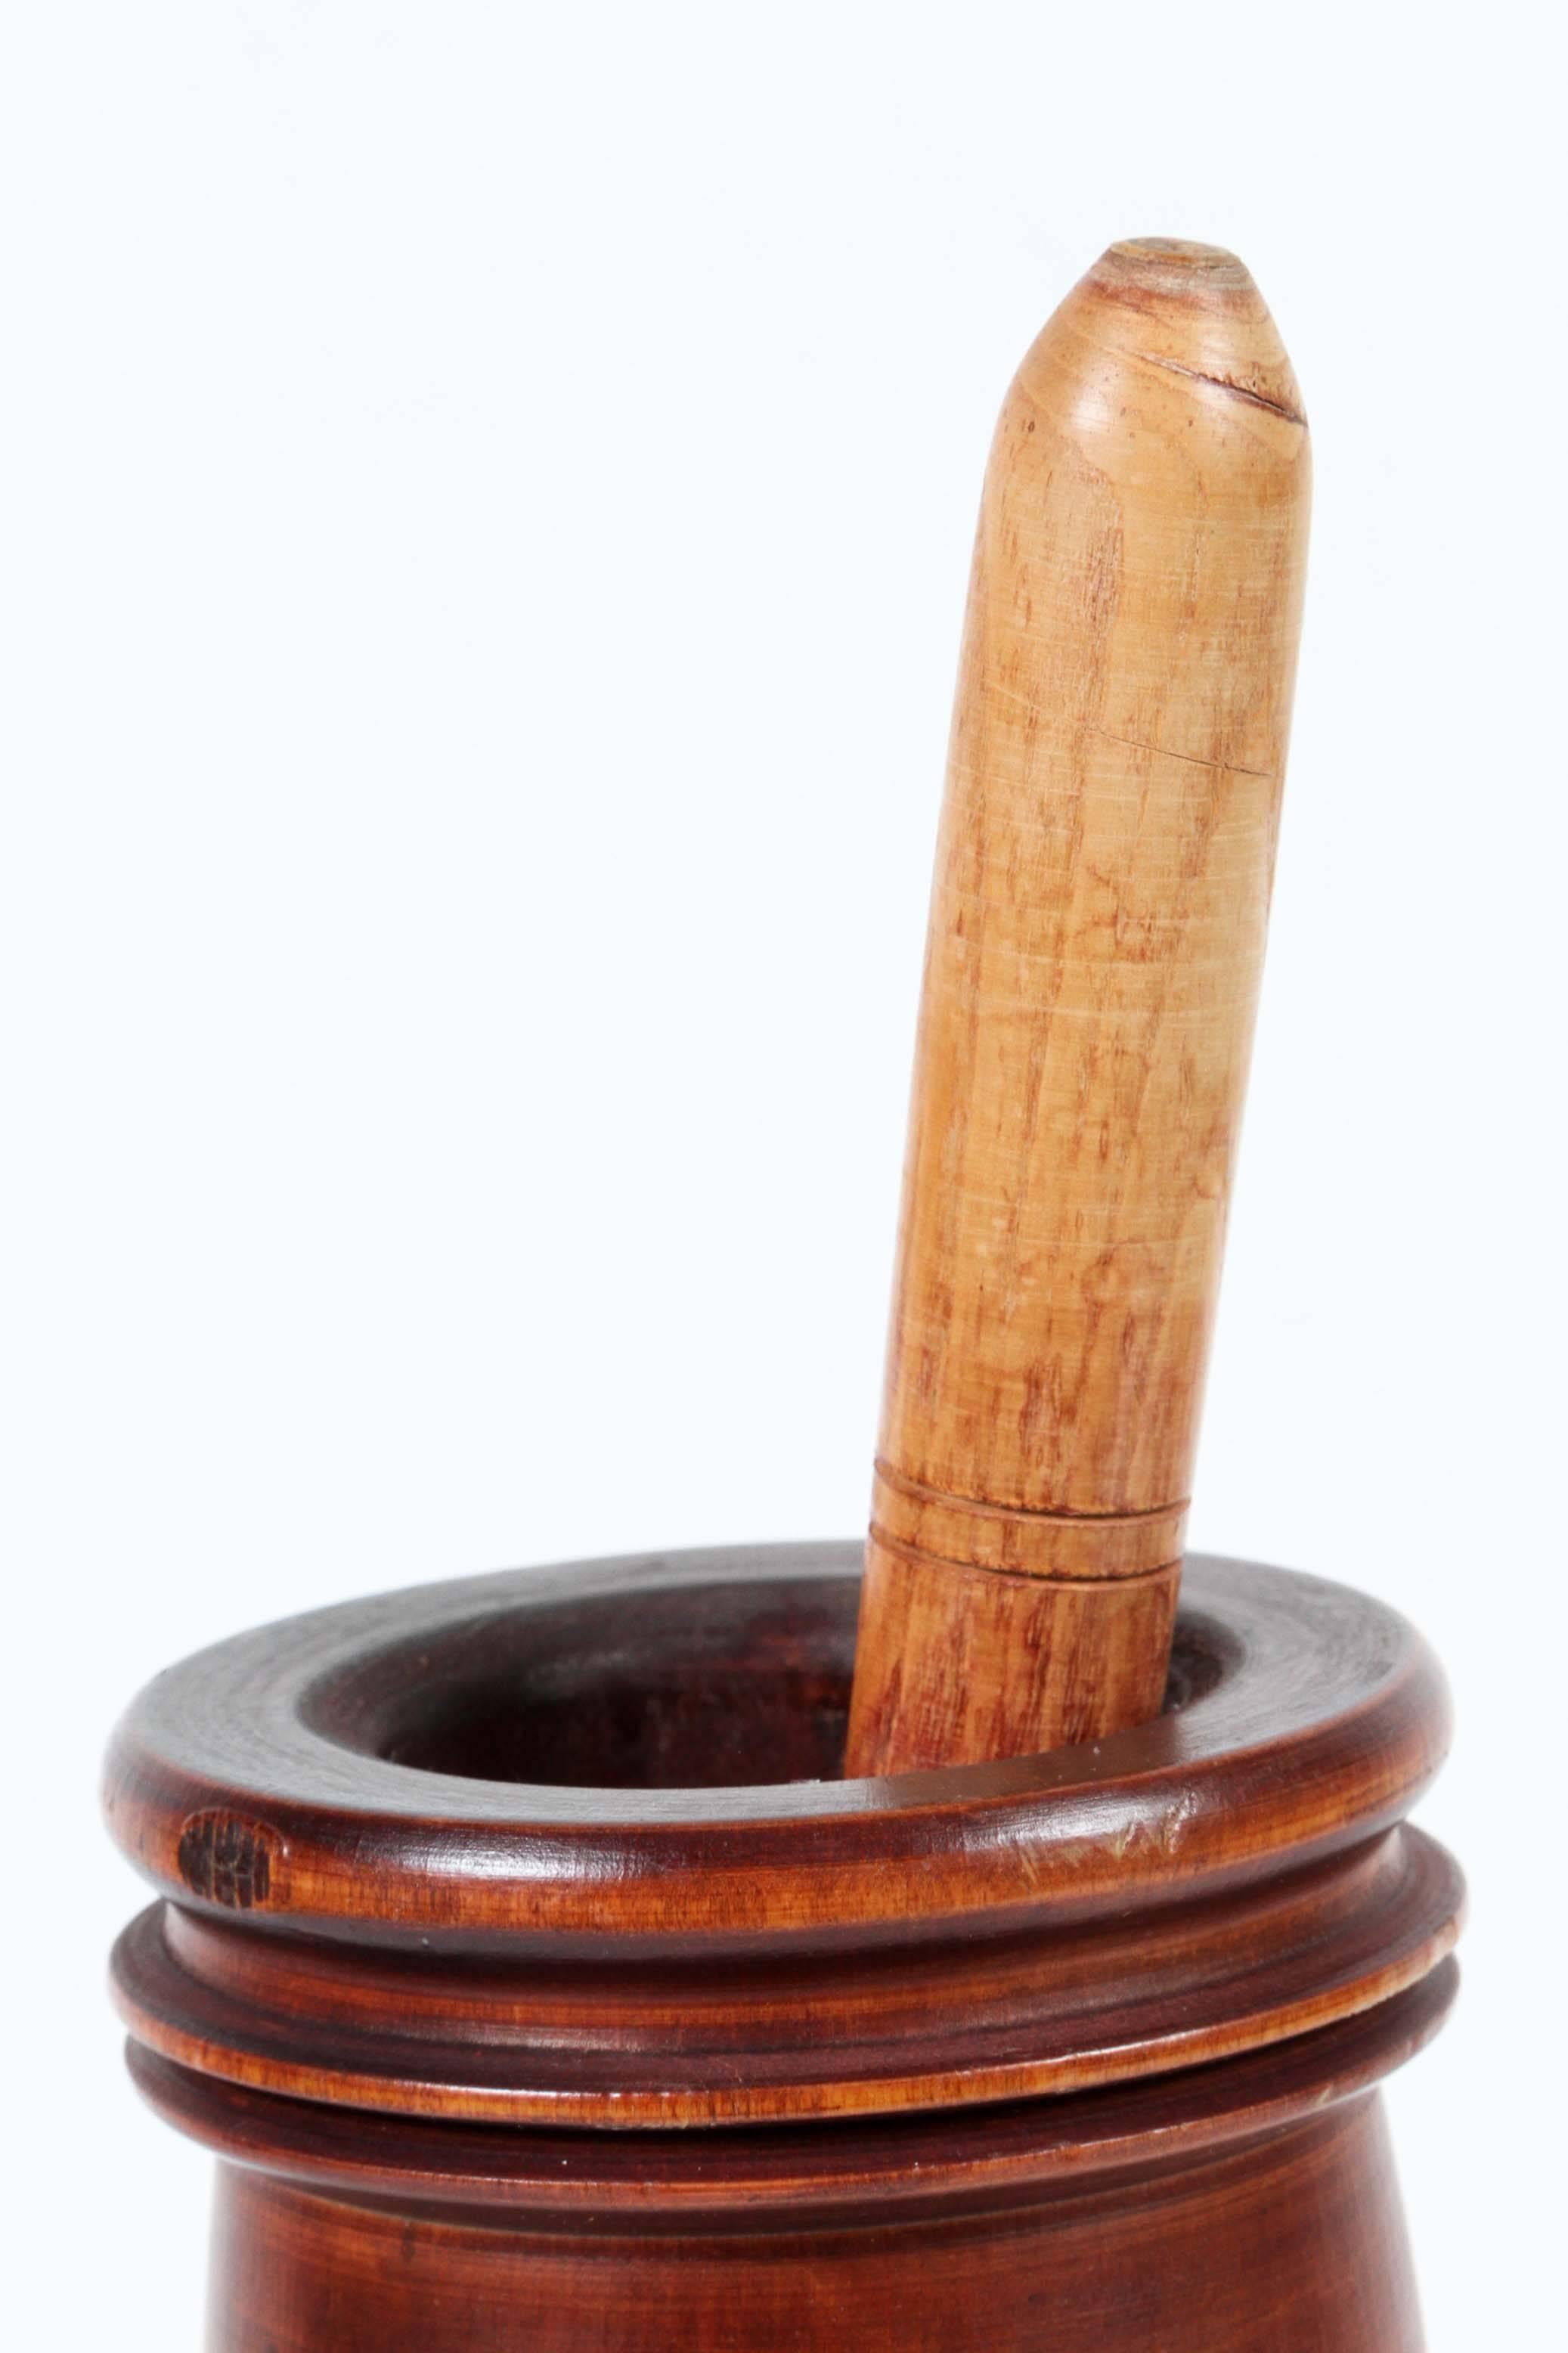 Wooden footed mortar and pestle.
Handcrafted in Italy, nice patina.
Total height with pestle: 14"
Mortar is 9"5 x 4" .
Pestle is 9"75 x 1"75.